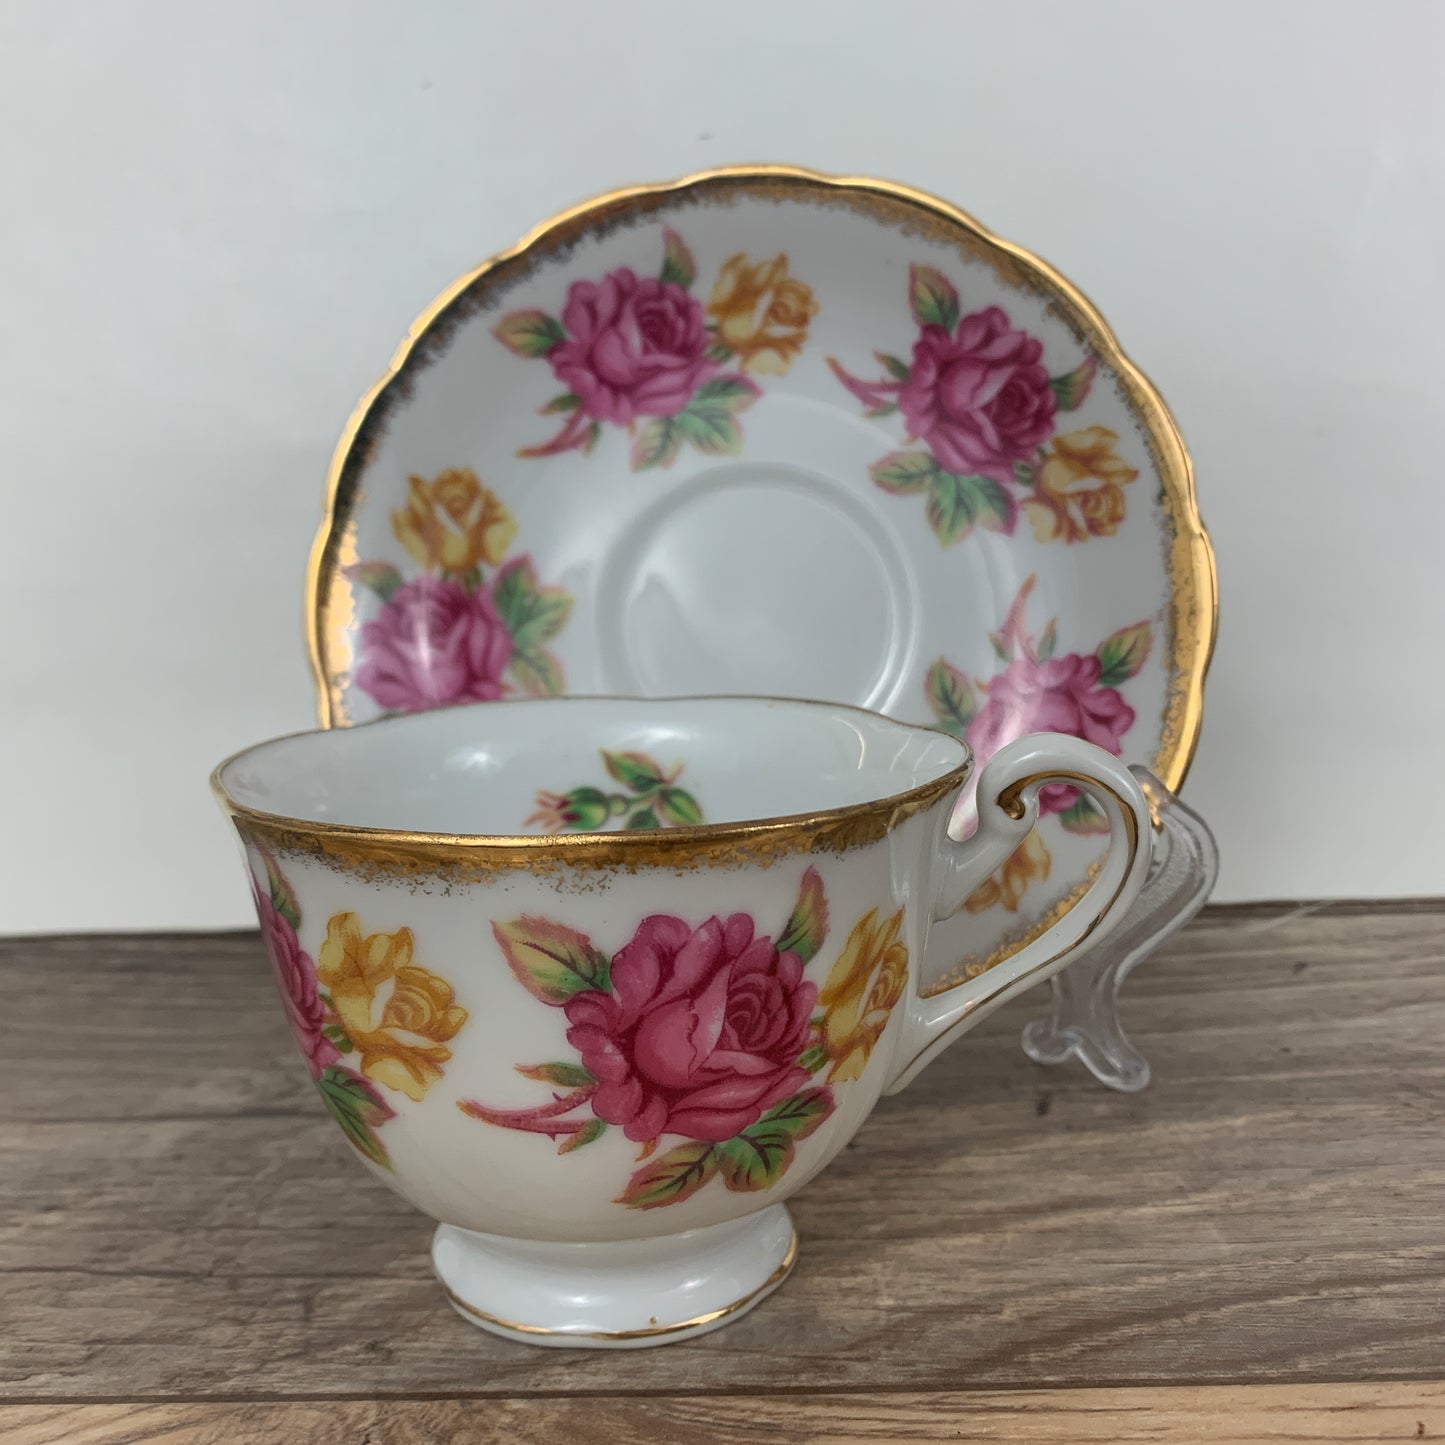 Vintage Teacup and Saucer w/ Pink and Yellow Roses and Gold Trim Made in Japan